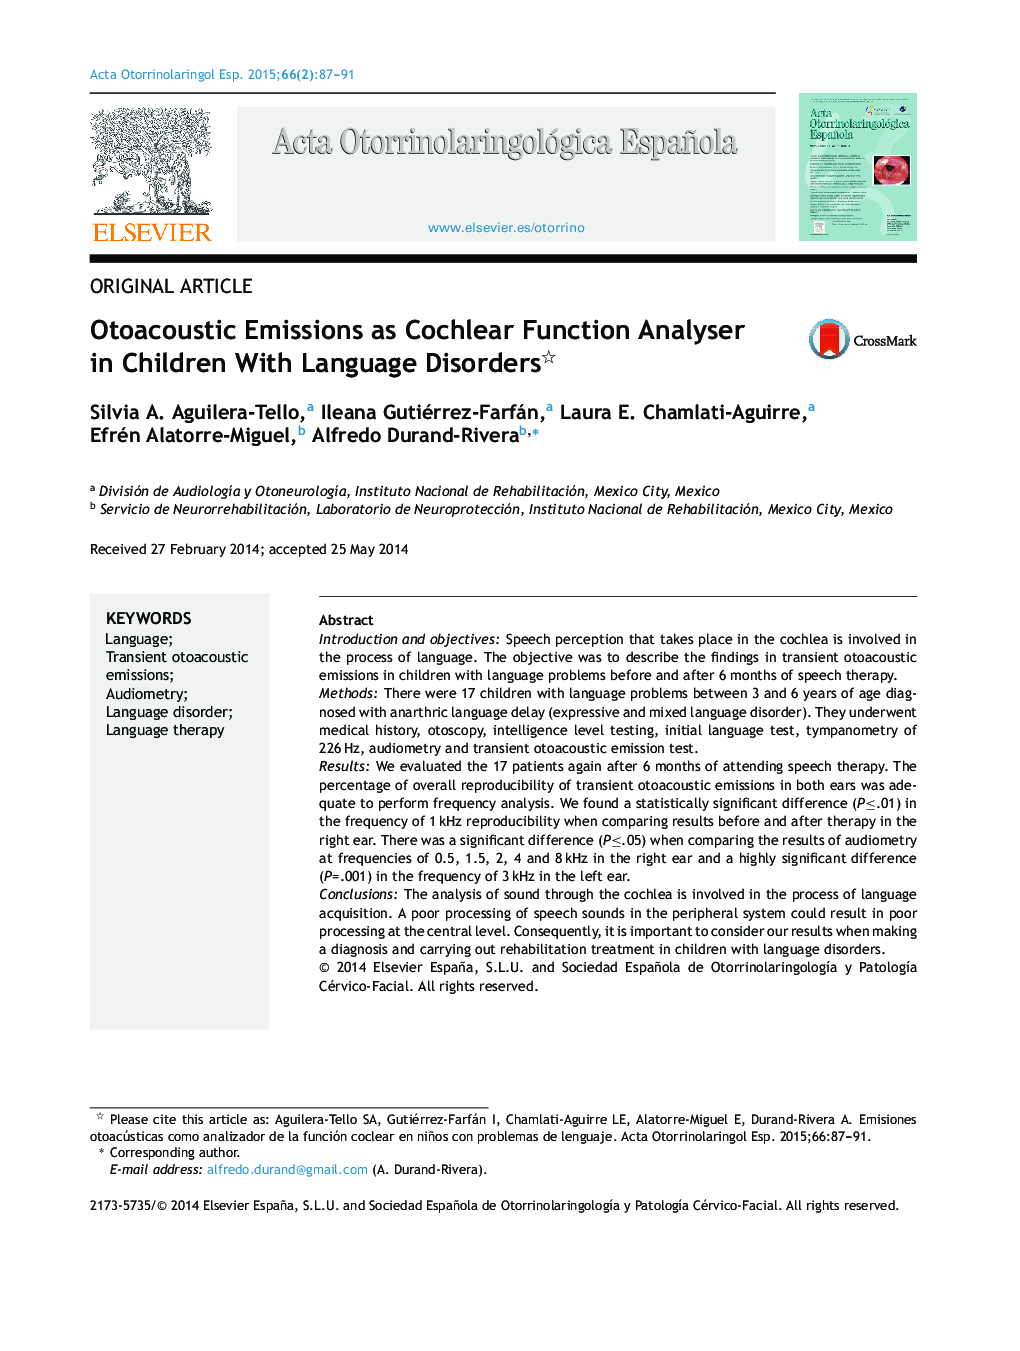 Otoacoustic Emissions as Cochlear Function Analyser in Children With Language Disorders 